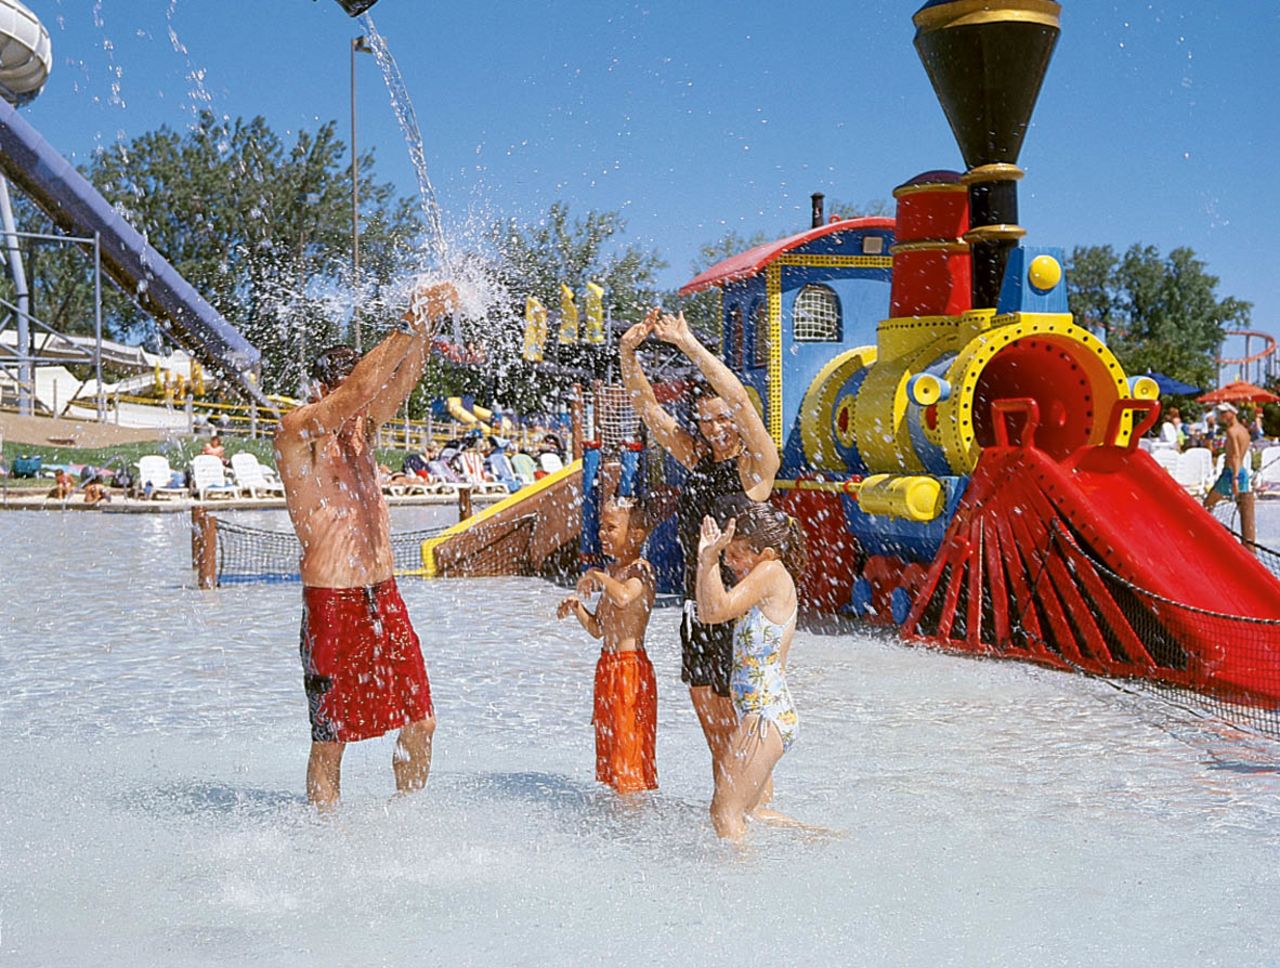 Soak City also is home to Splash Zone, described by the park website as "a multistory interactive play area with more than 100 different wet and wild water gadgets." In 2012, 403,000 visitors passed through Soak City, according to the Themed Entertainment Association.